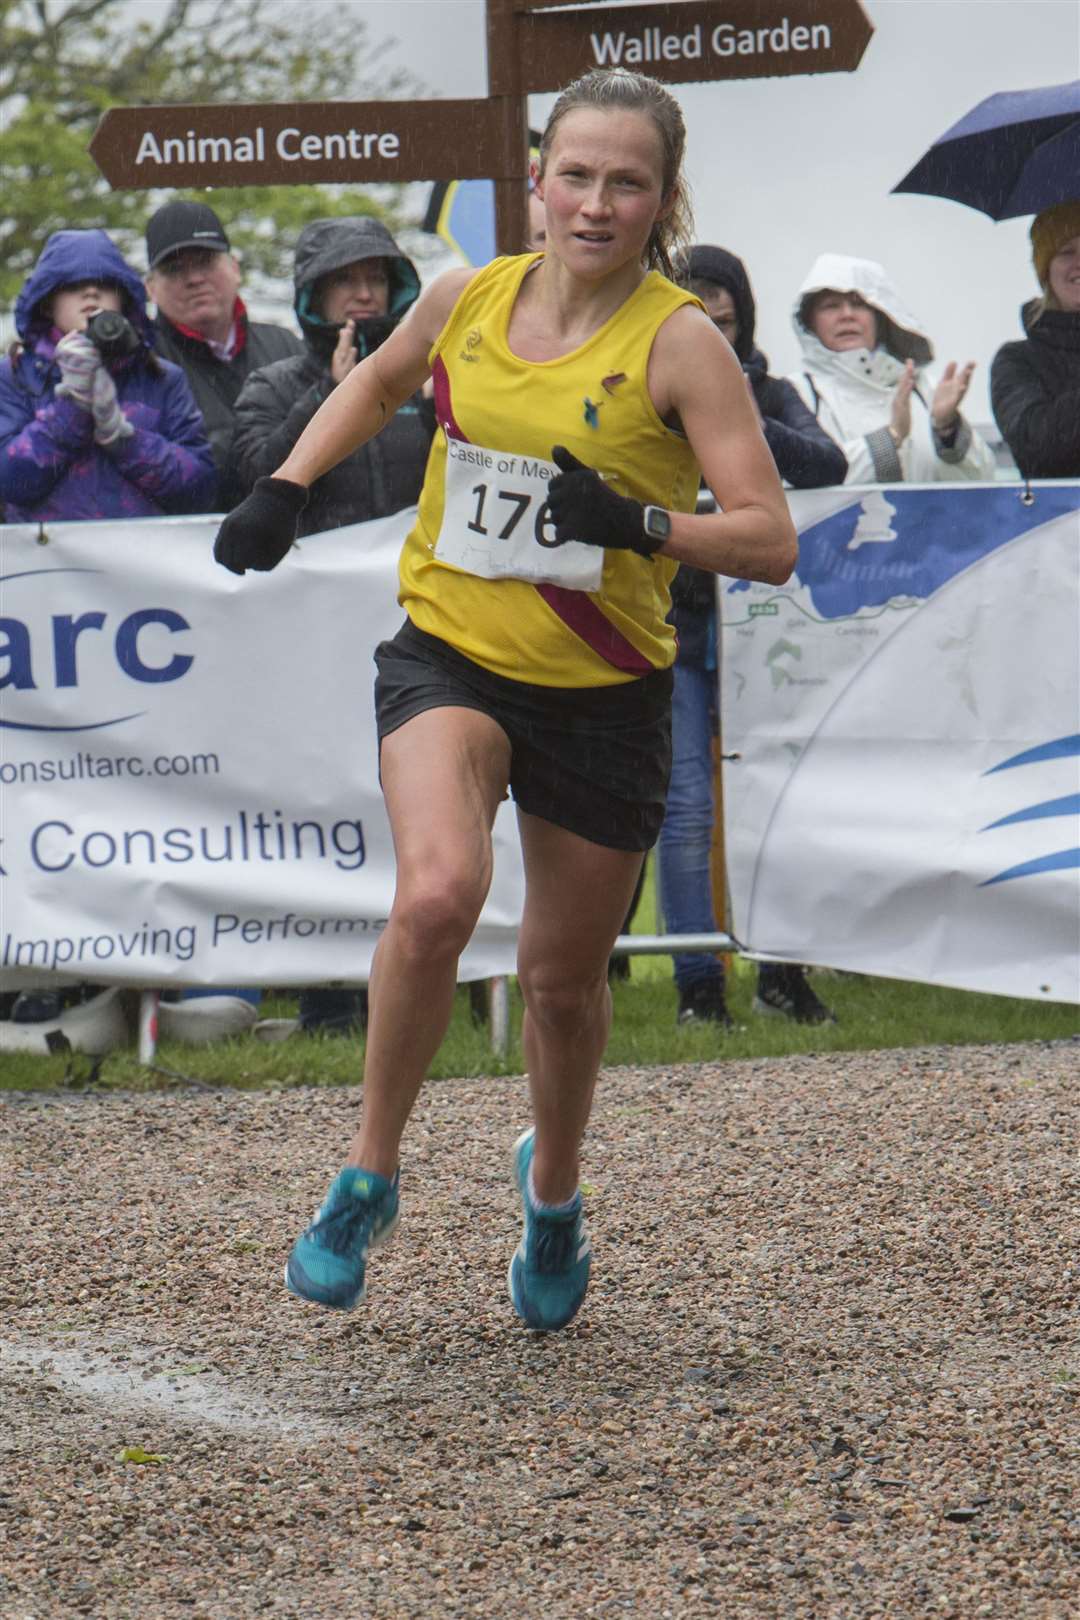 Inverness Harriers’ Jenny Bannerman became the first woman to win the overall title at the Mey 10k after leading from the start, also beating her own record. Picture: Robert MacDonald / Northern Studios